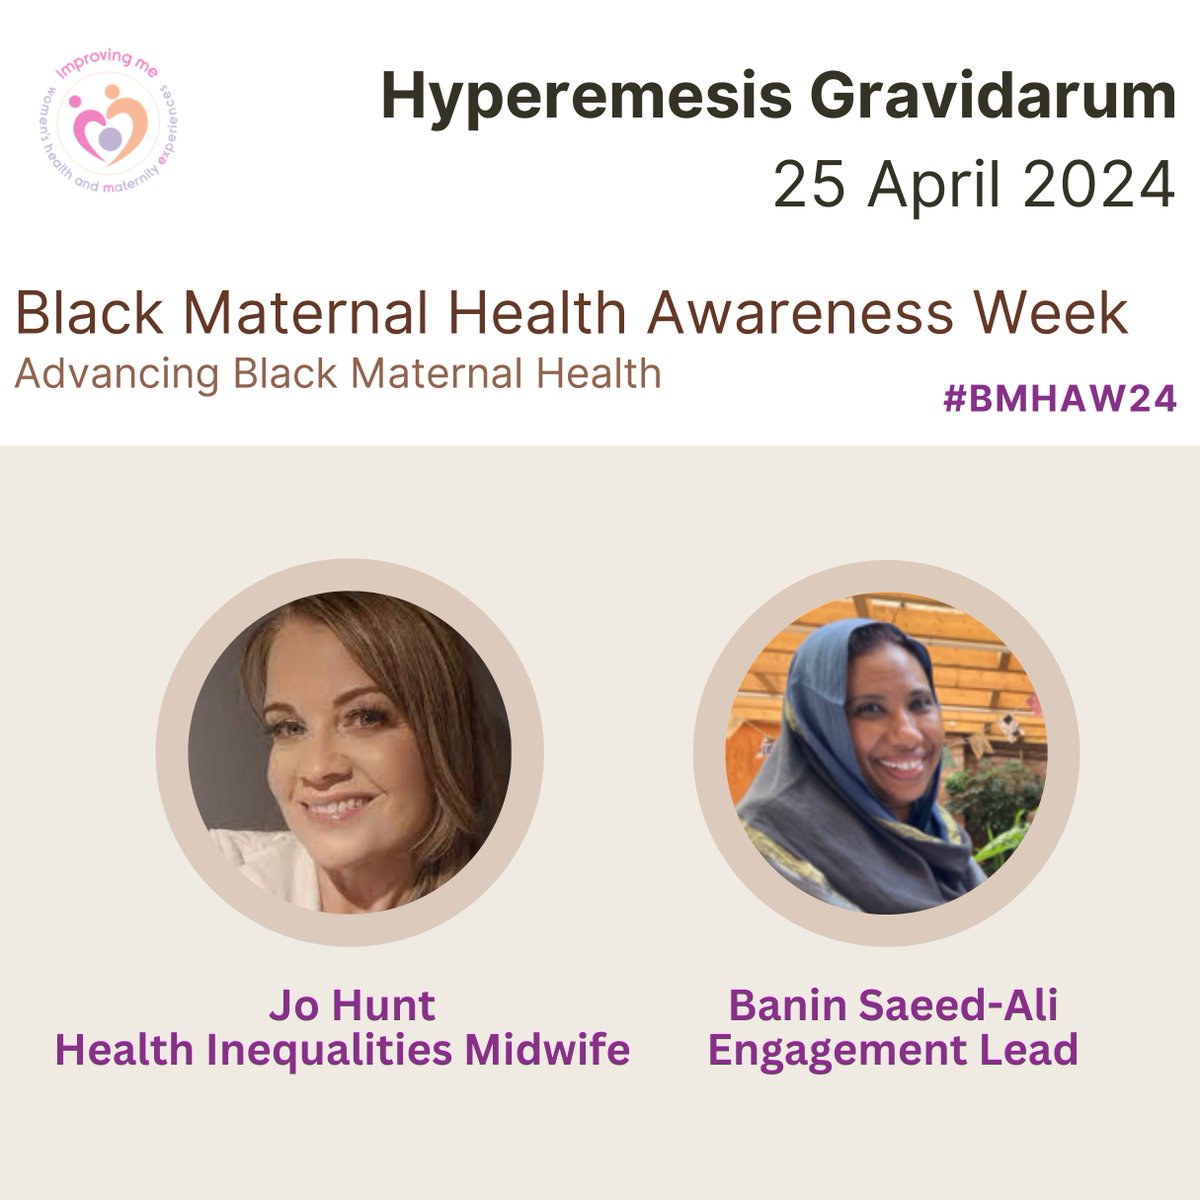 This week is Black Maternal Health Awareness Week #BMHAW24. Today's theme is #HyperemesisGravidarum. Our health inequalities midwife, Jo, and engagement lead, Banin, discuss this topic. Watch here🔗youtu.be/-LhMqs8nbpo